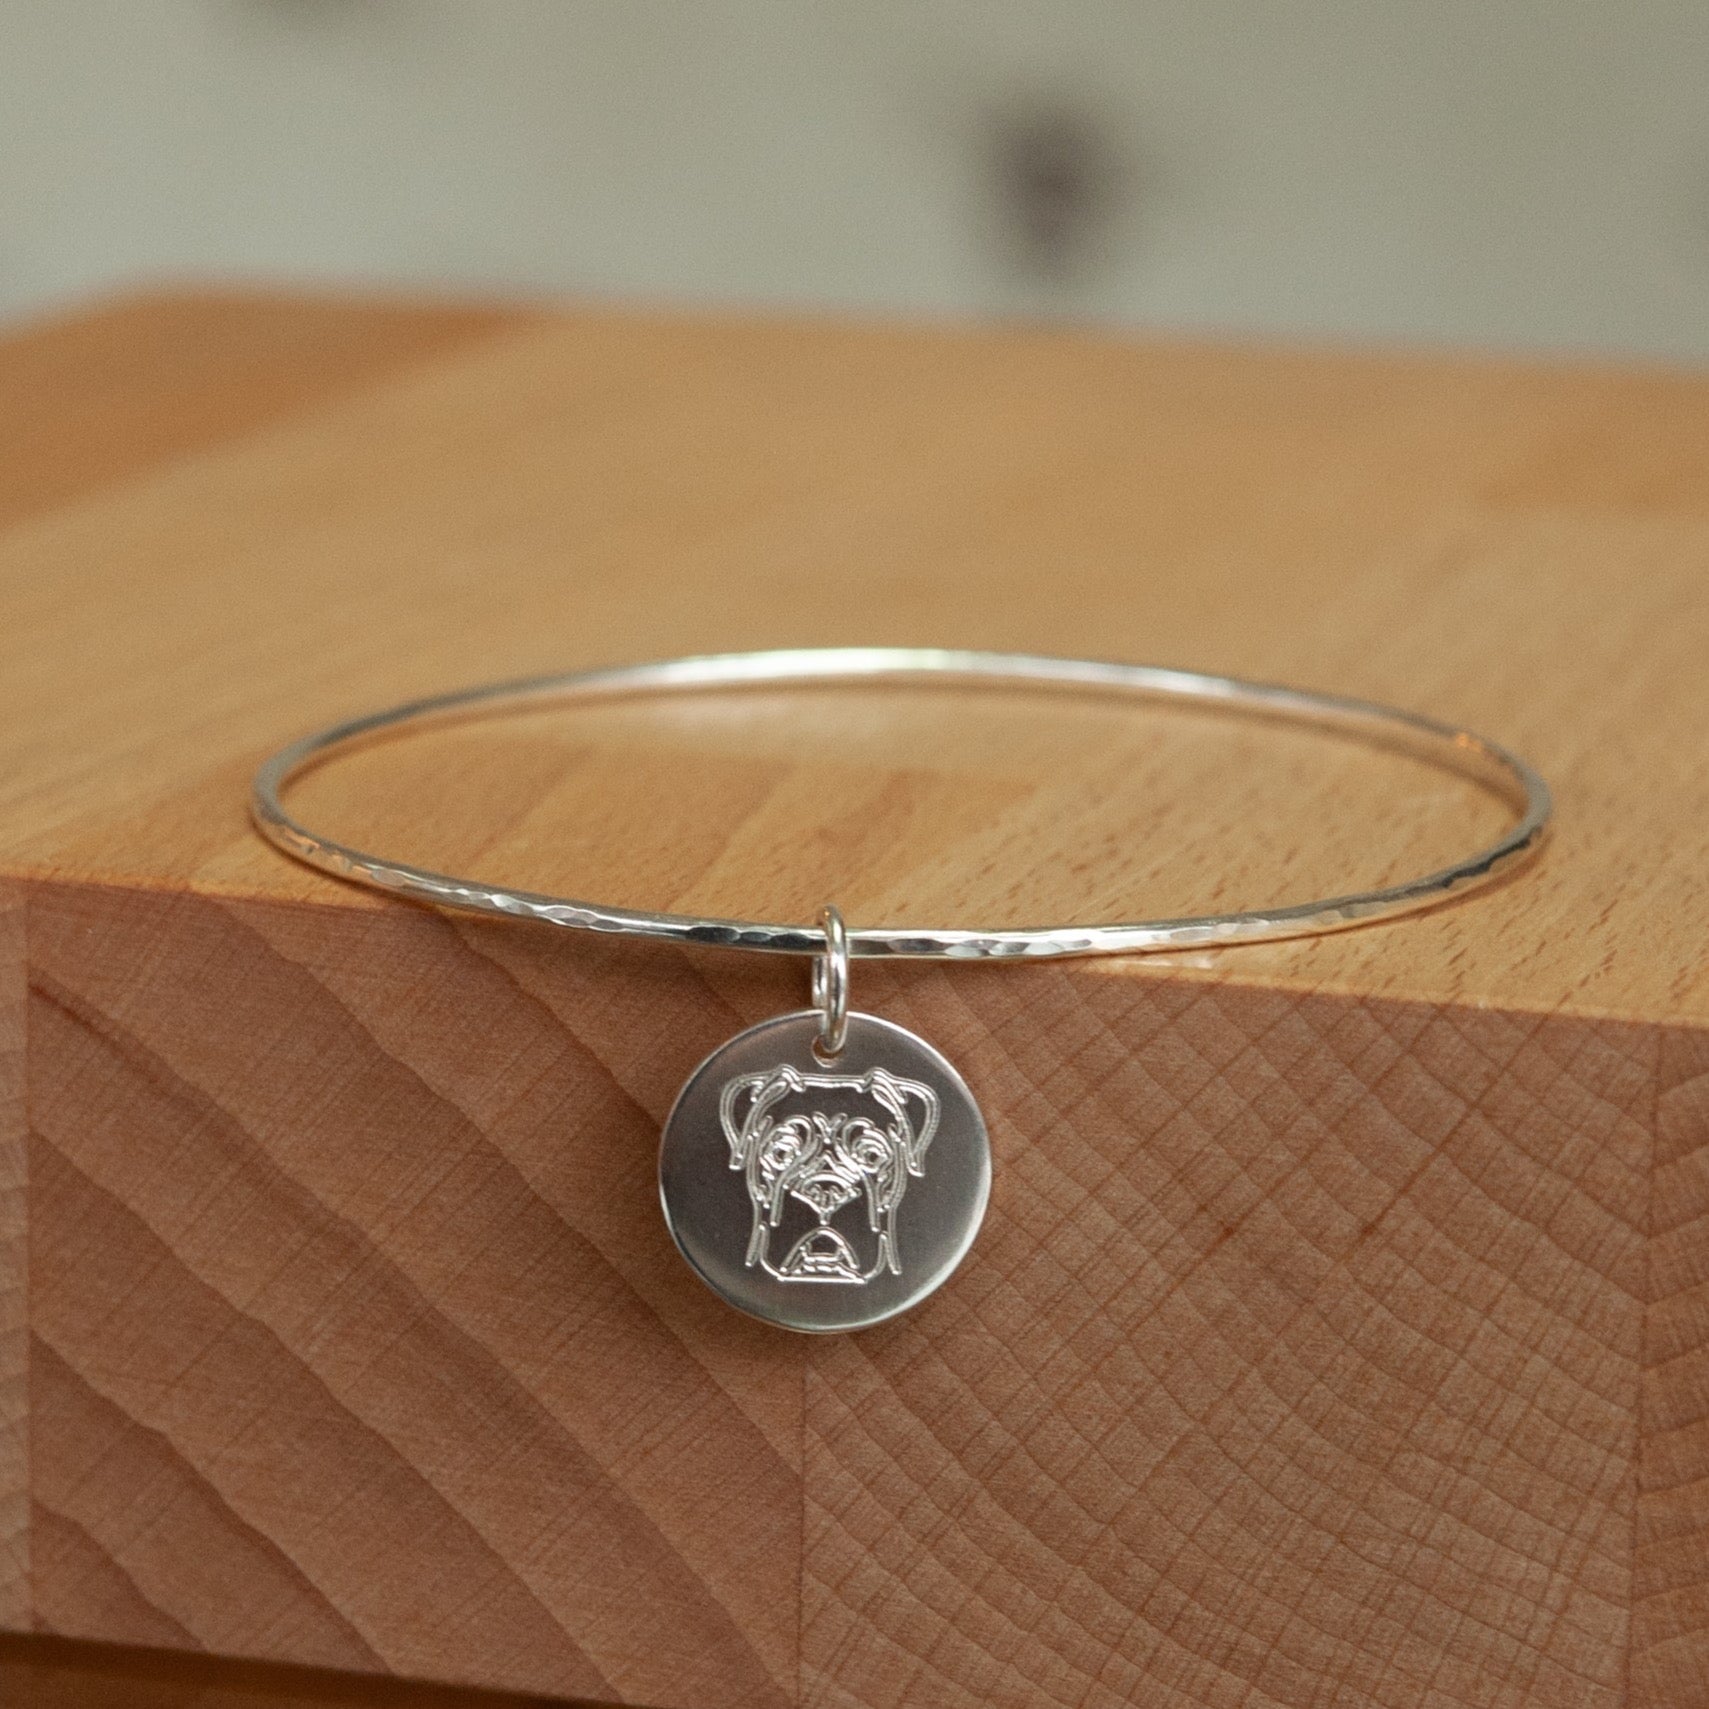 Belle & Bee Sterling Silver Boxer Dog charm bangle